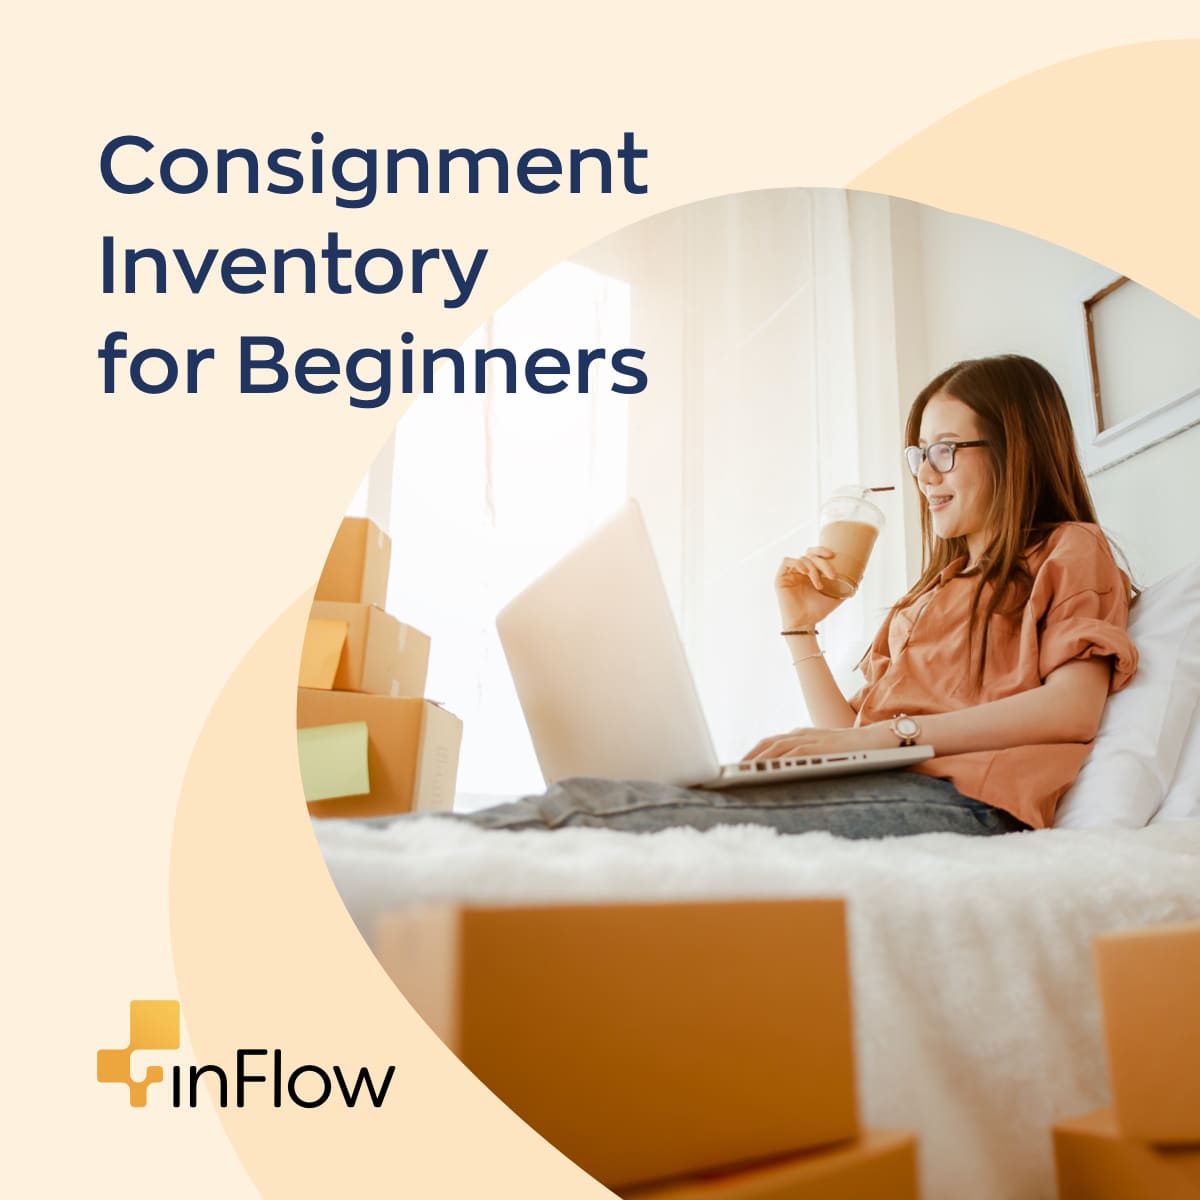 Consignment inventory for beginners